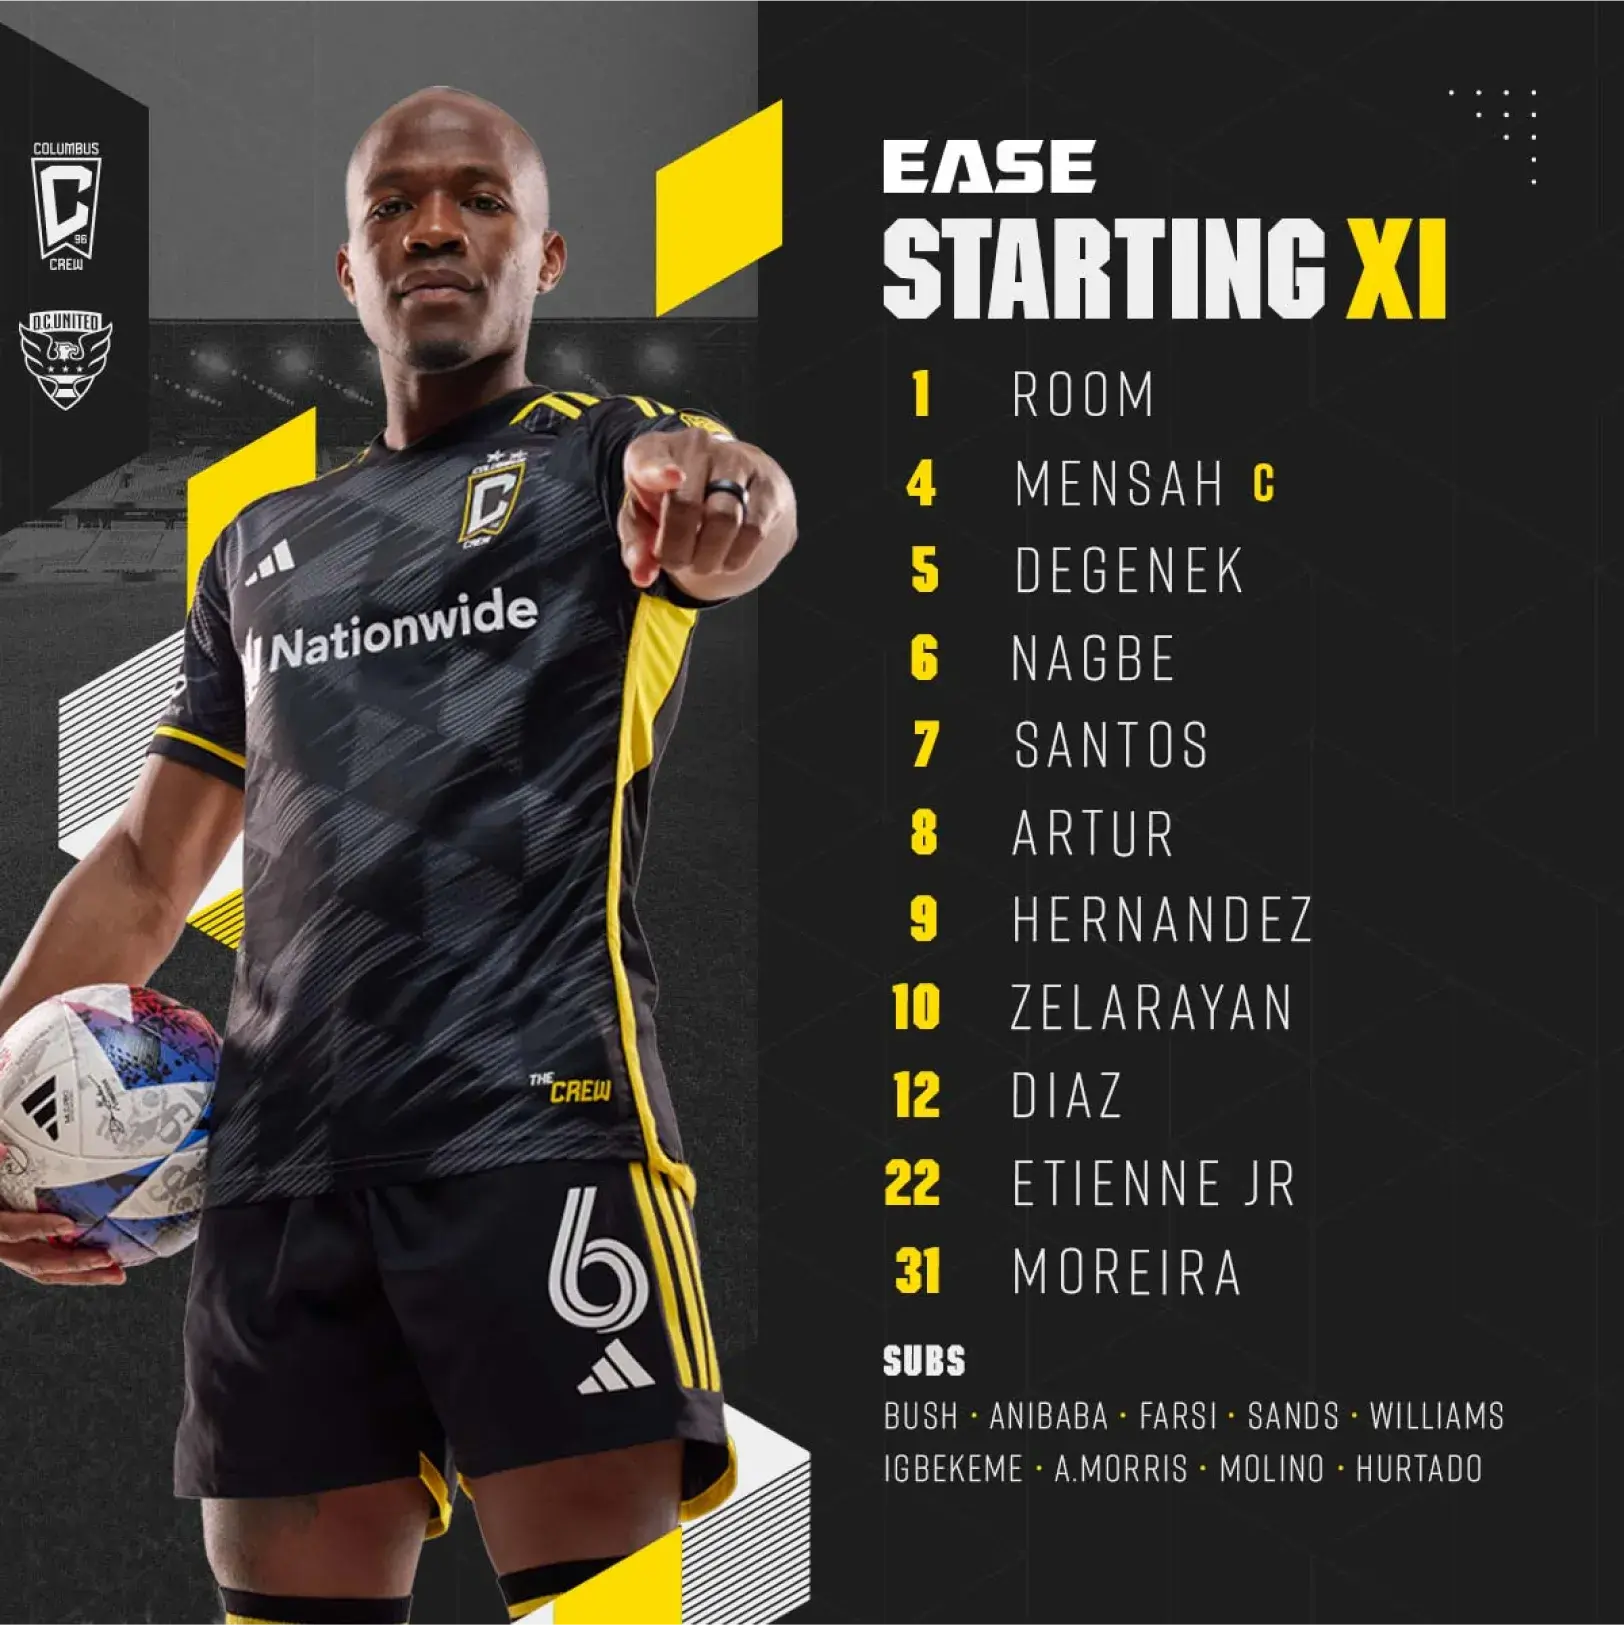 Starting XI social media graphic featuring a Crew player holding a ball and pointing toward the viewer 